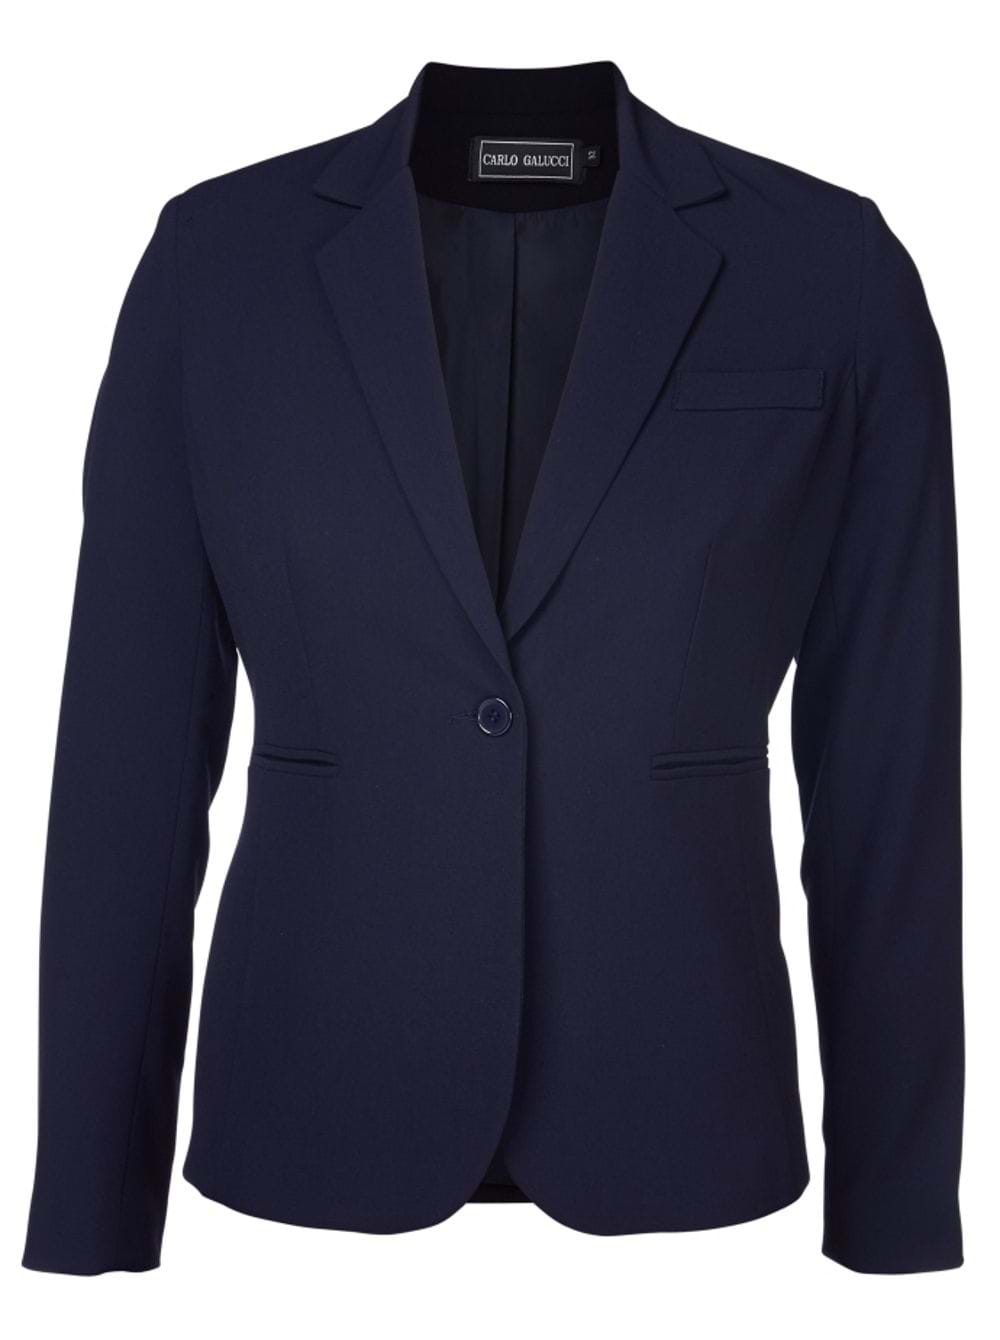 Justine 505 Tailored Fit Jacket - Navy